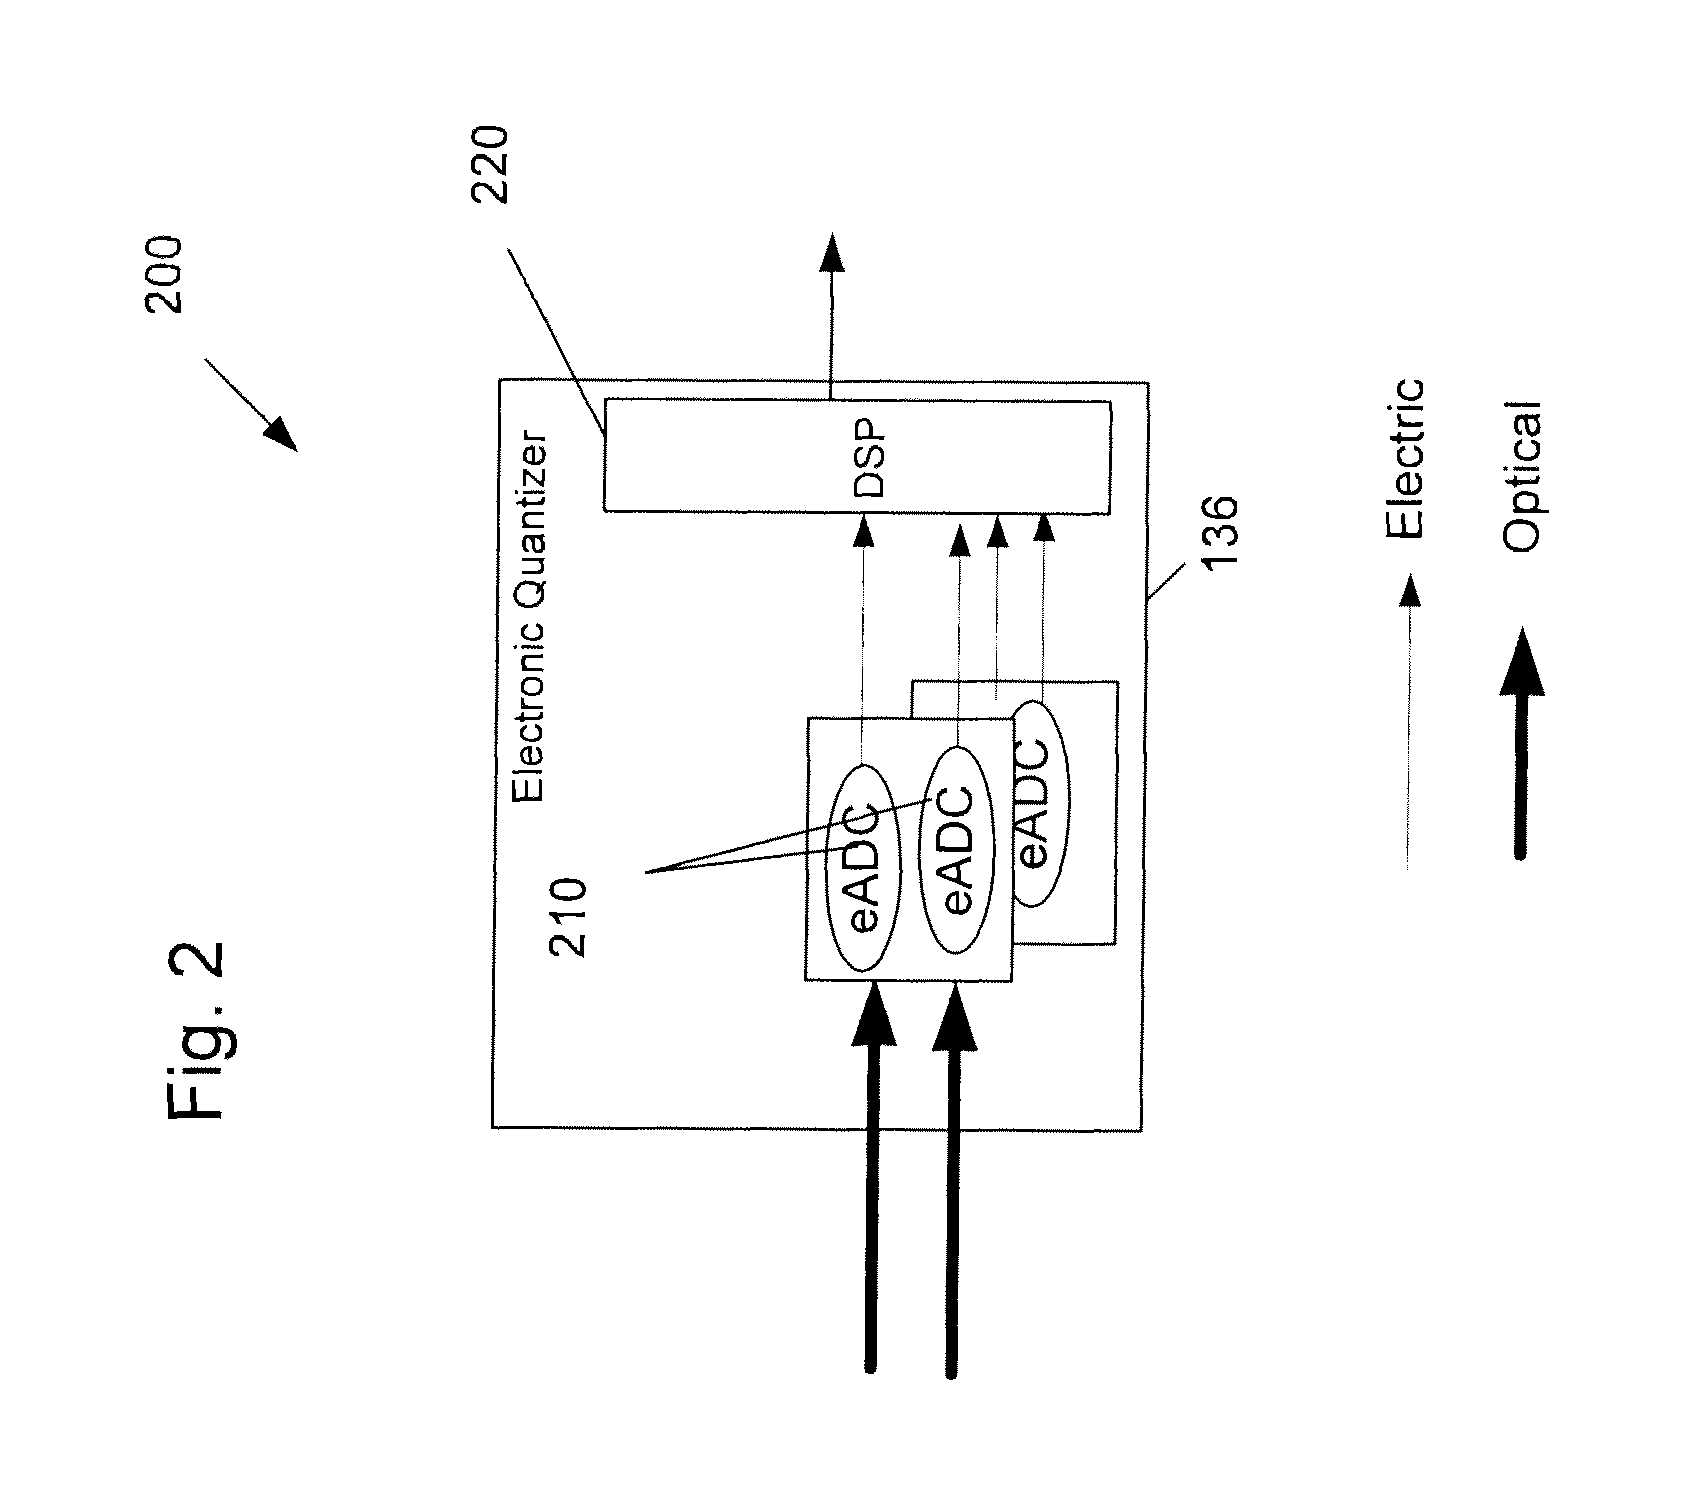 Optical deserialization with gated detectors: system and method